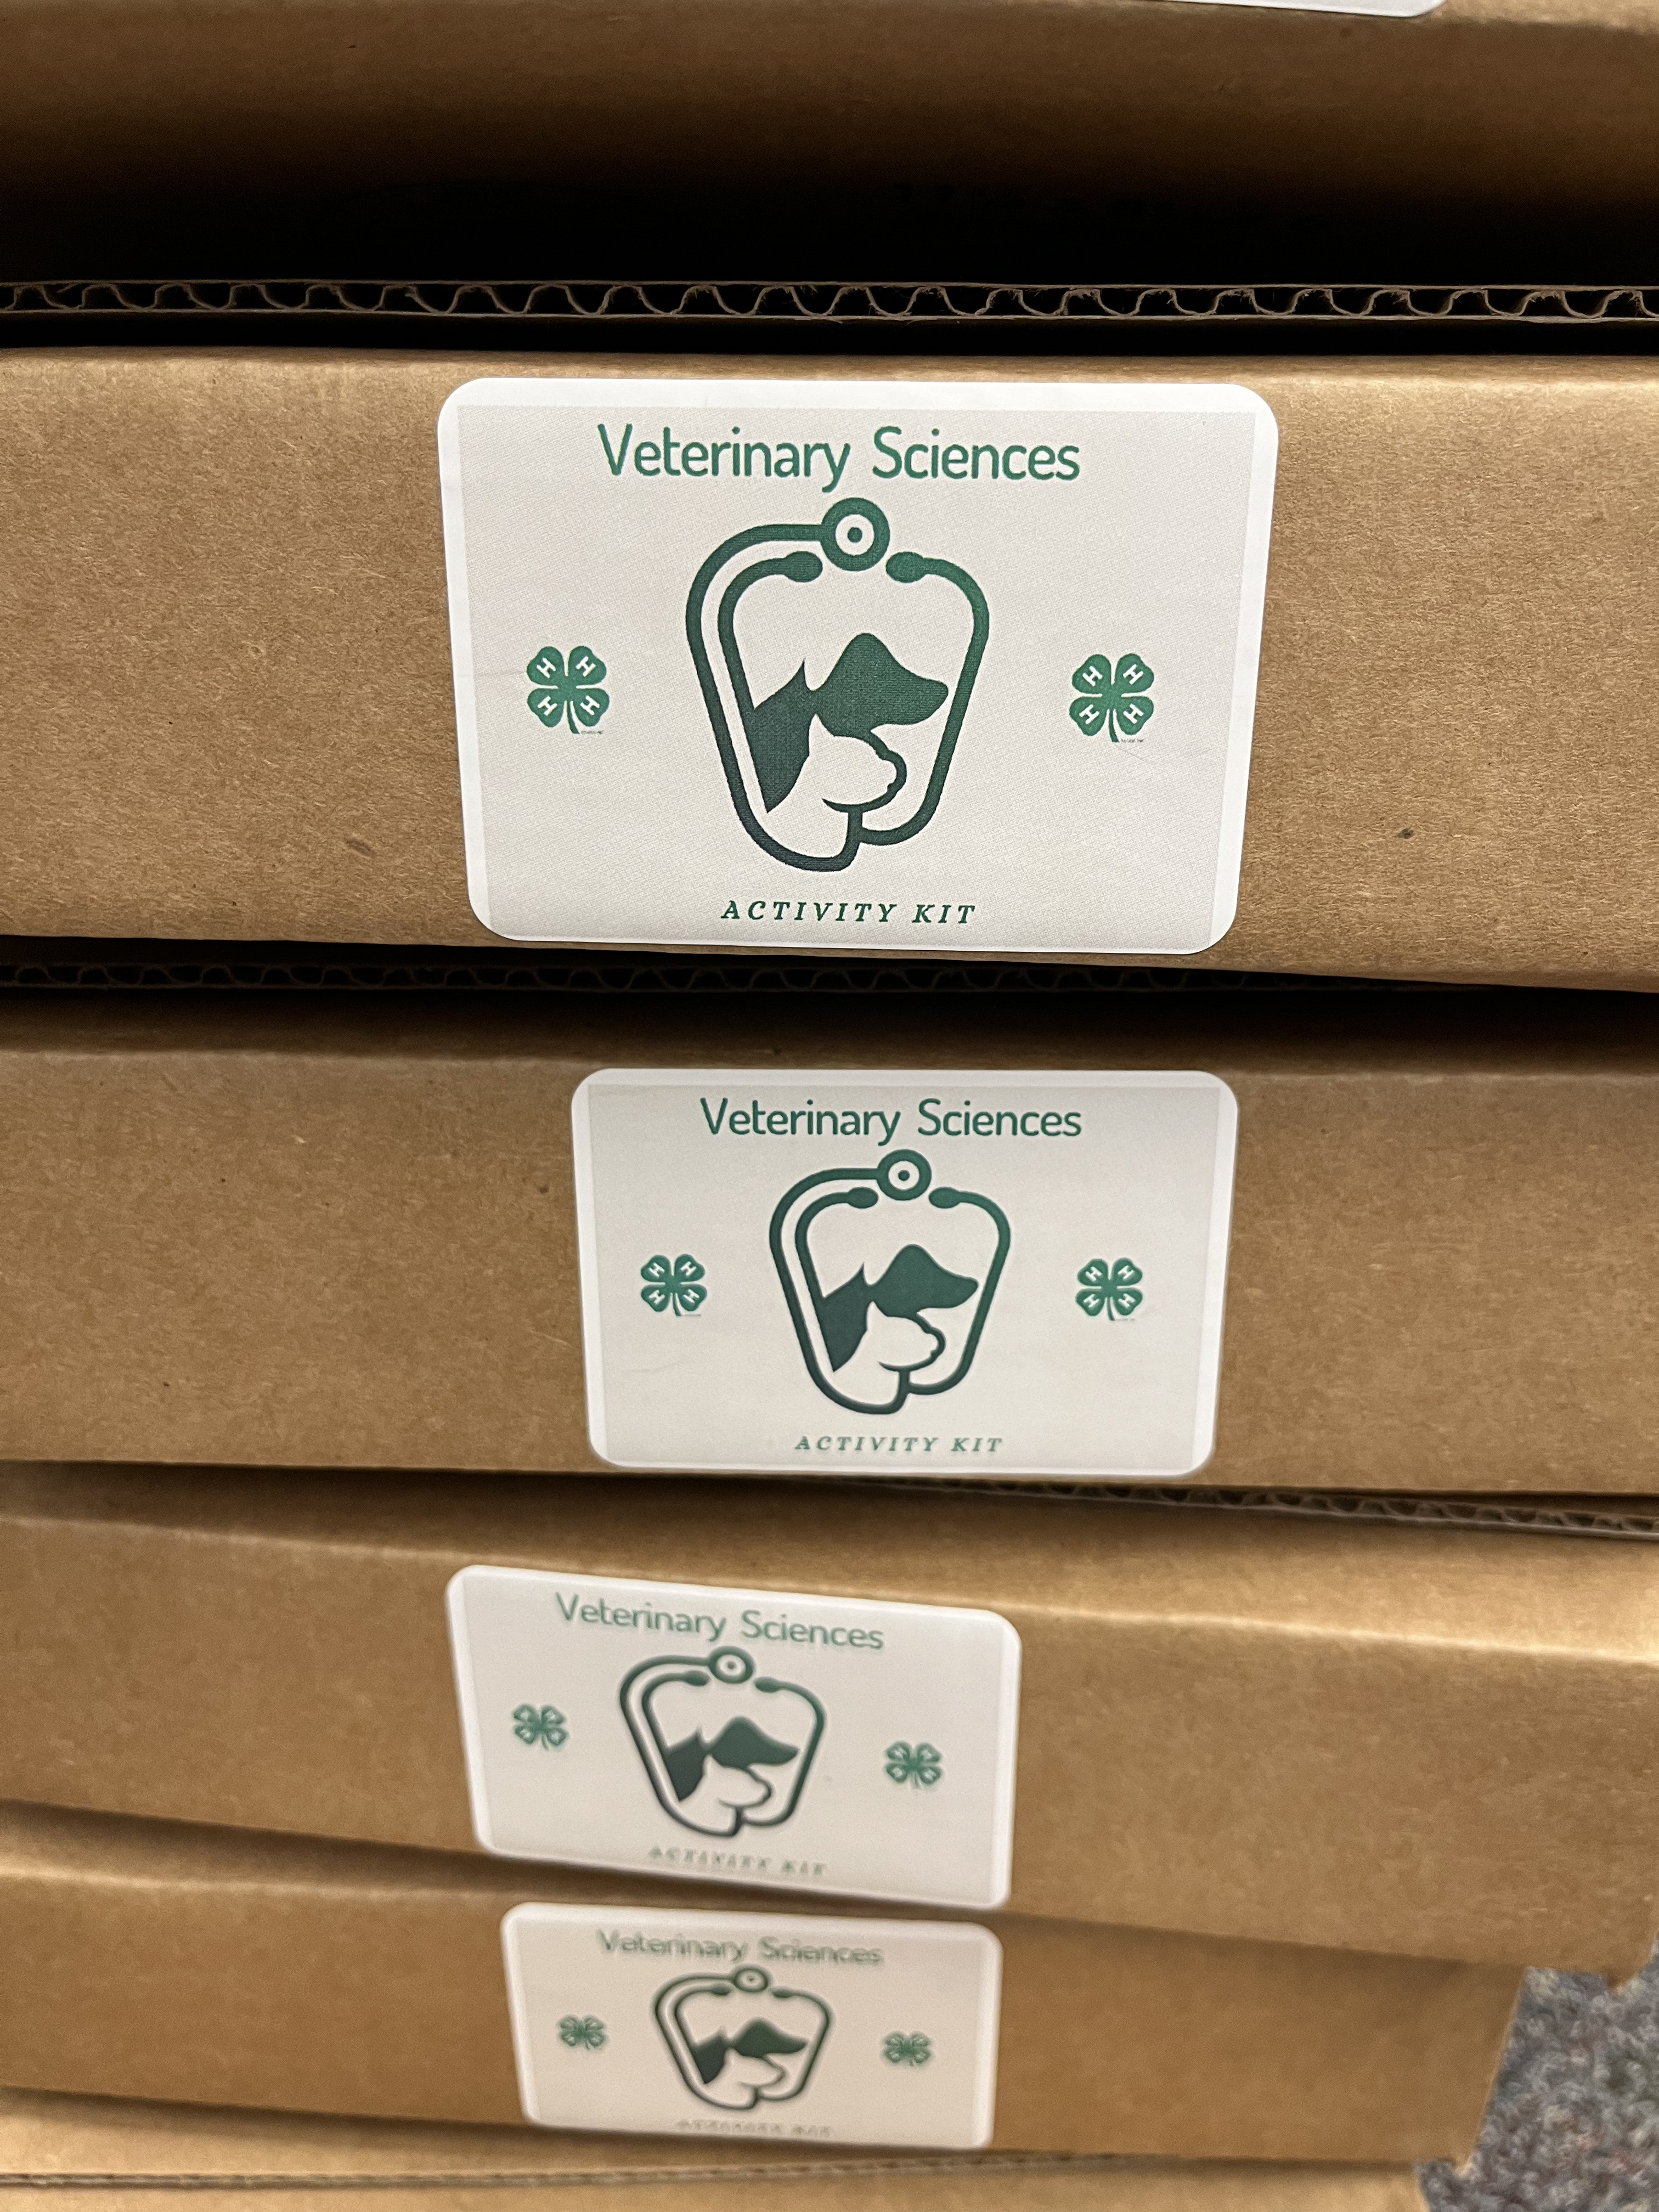 Veterinary science activity kits are available for middle school students at no charge. Pick up is at the N.C. Cooperative Extension office below the library in Lenoir.